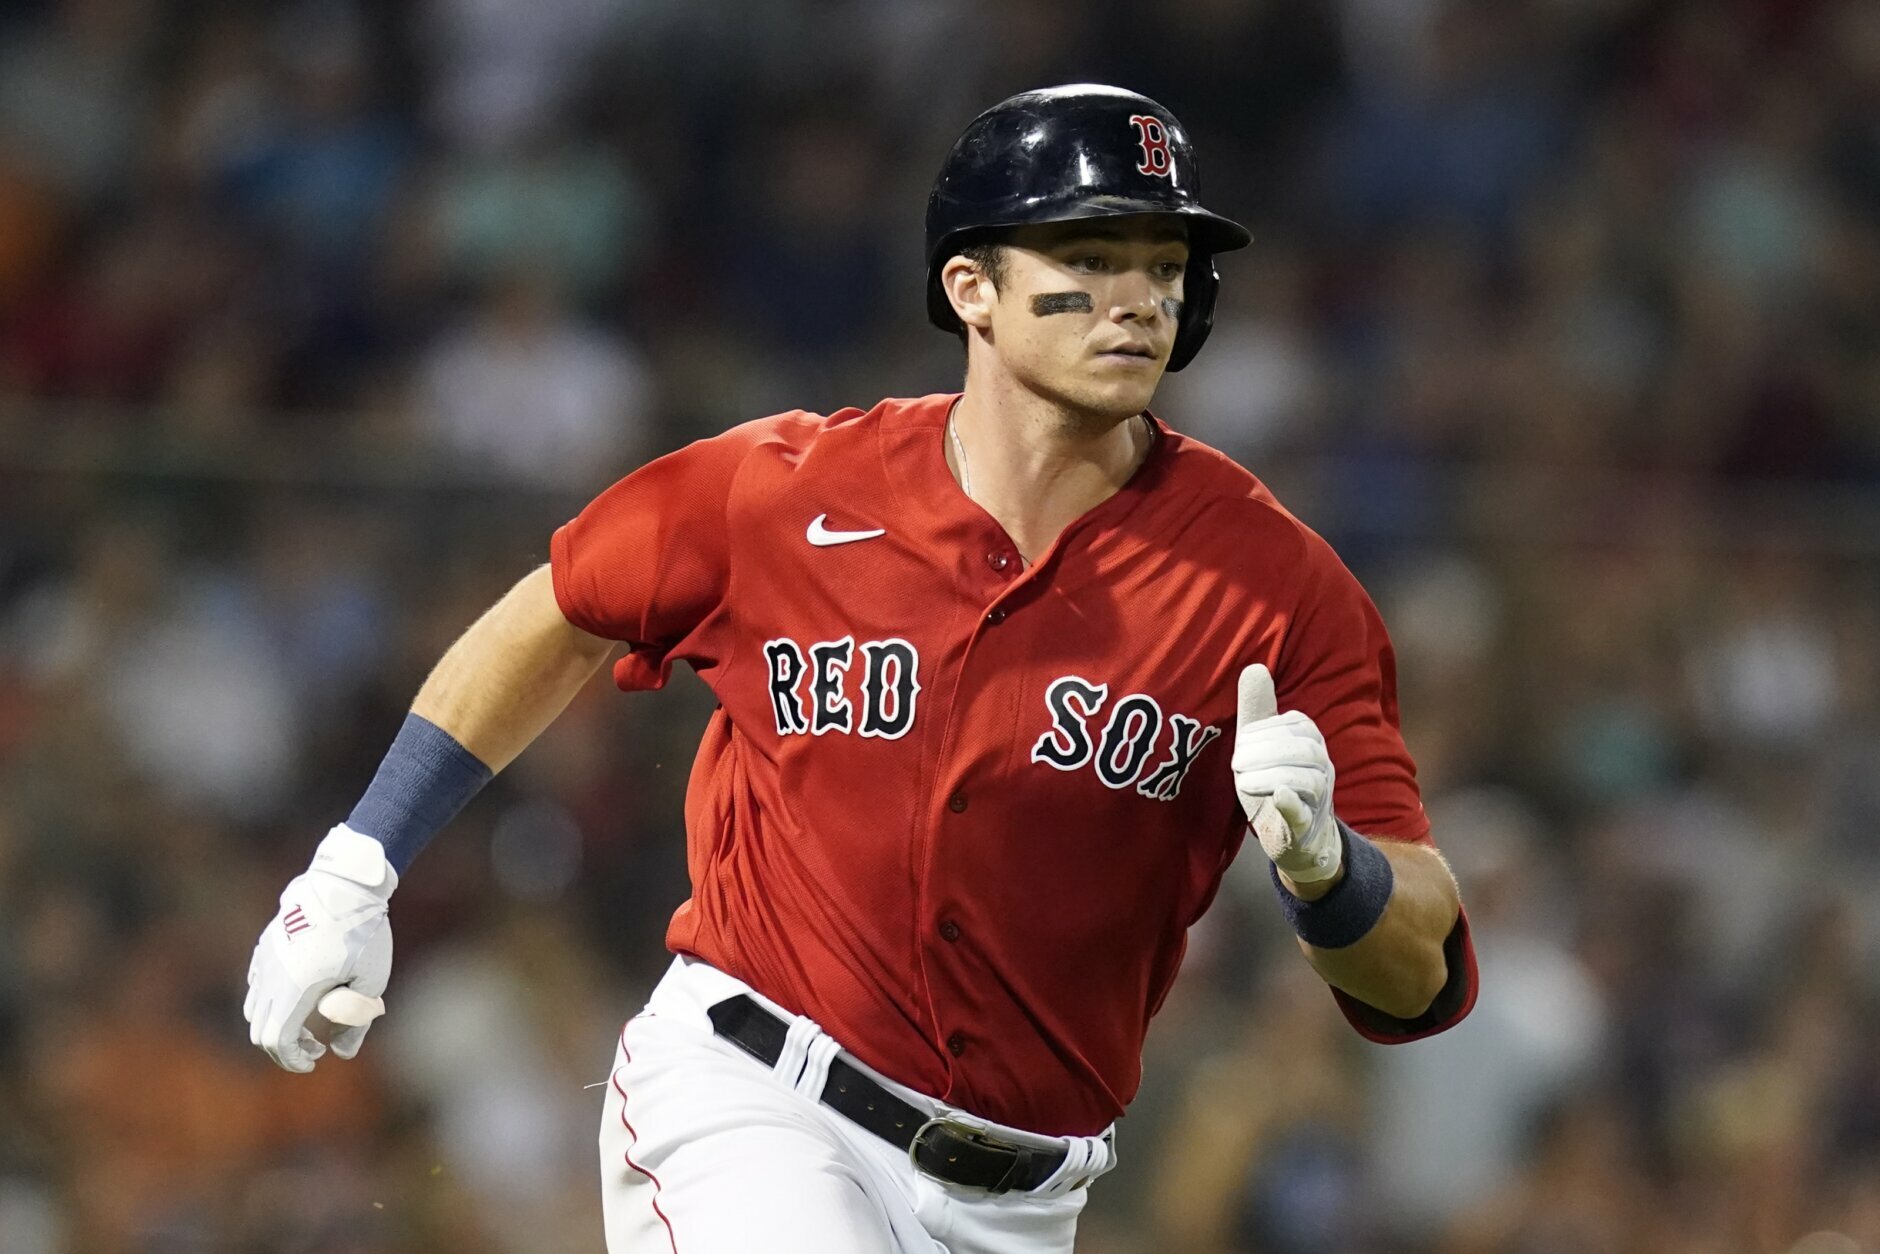 Cats in the Pros: Bobby Dalbec Makes MLB Debut with Red Sox